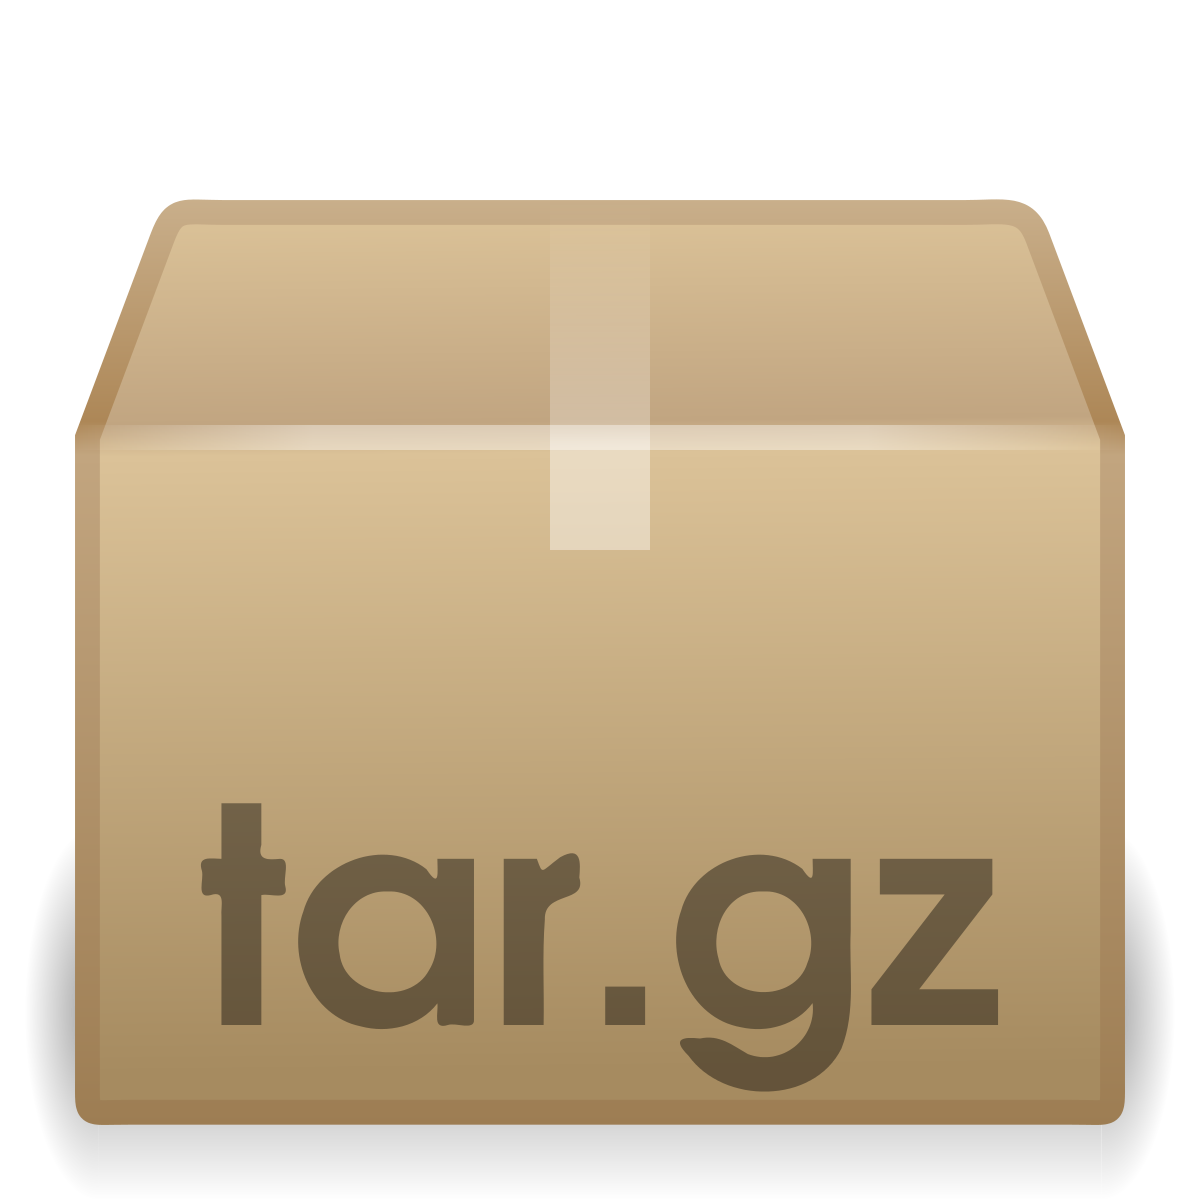 How to Unzip/Extract tar.gz Files in Linux {Basic tar commands} 1